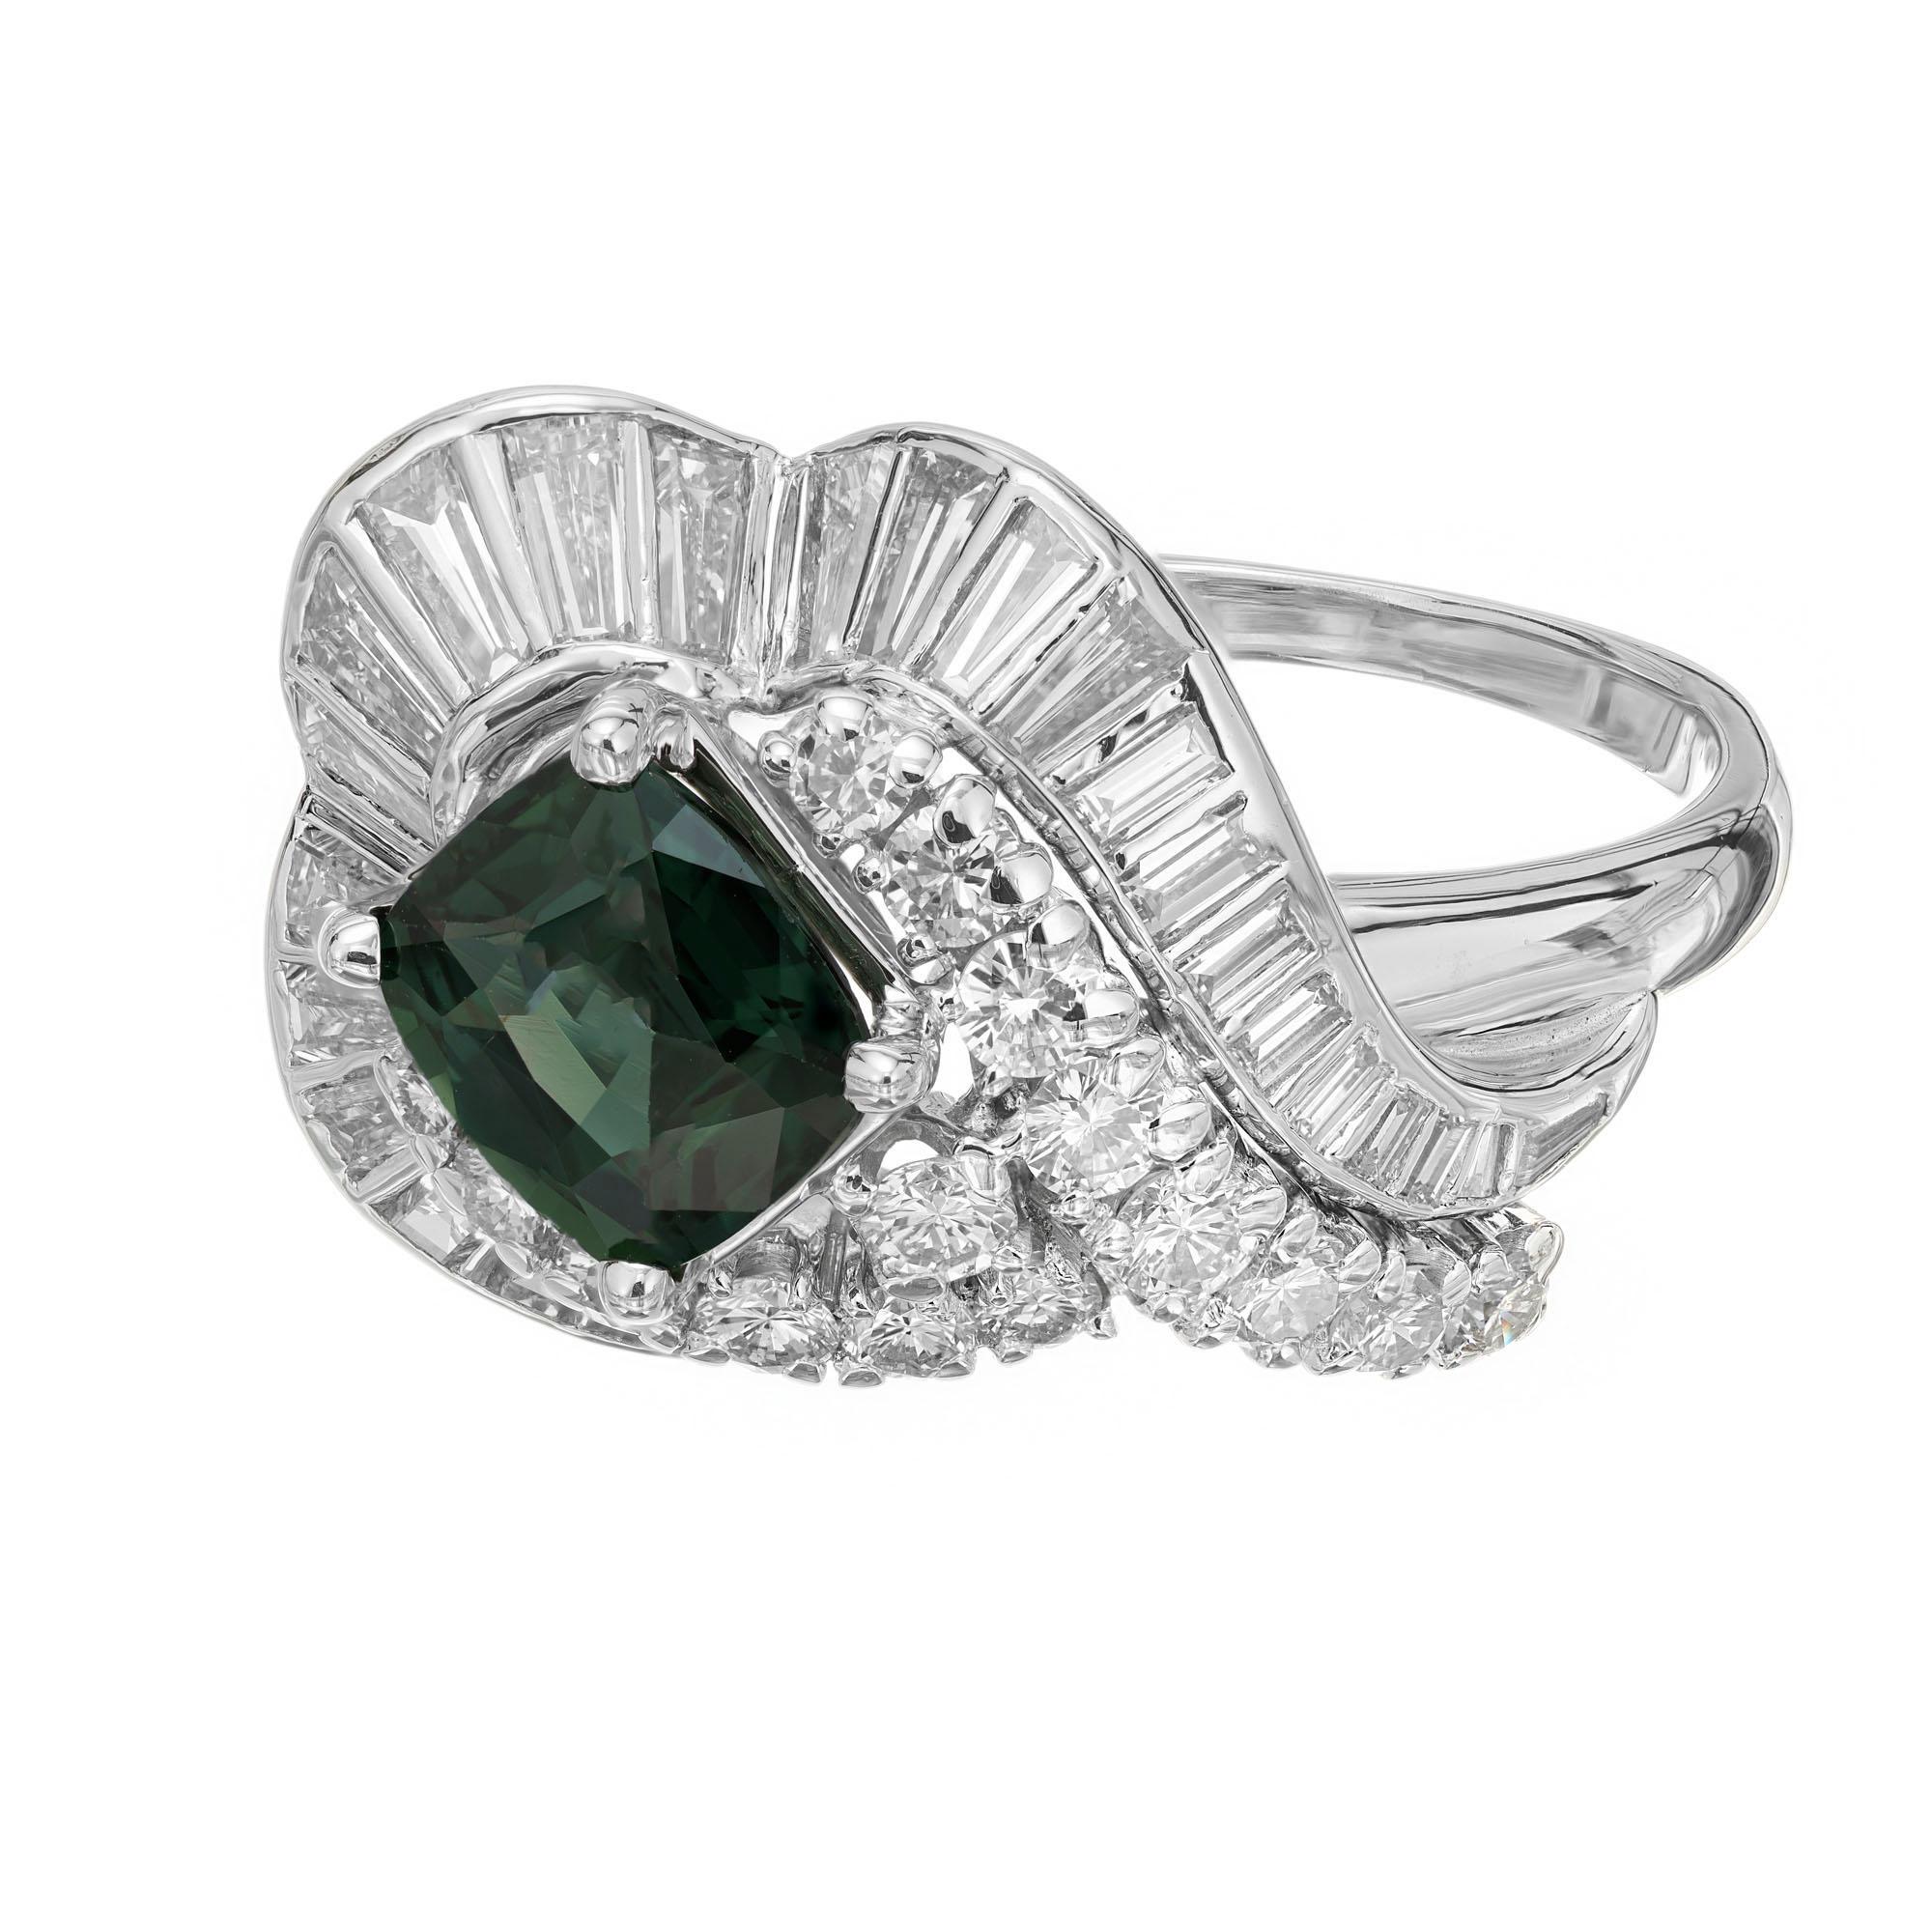 JE Caldwell 1950's dinner cluster cocktail ring. GIA certified center cushion cut green natural no heat sapphire in a platinum setting with 17 round brilliant and 28 baguette cut diamonds. 

1 cushion cut green-blue sapphire, VS approx. 1.63cts GIA